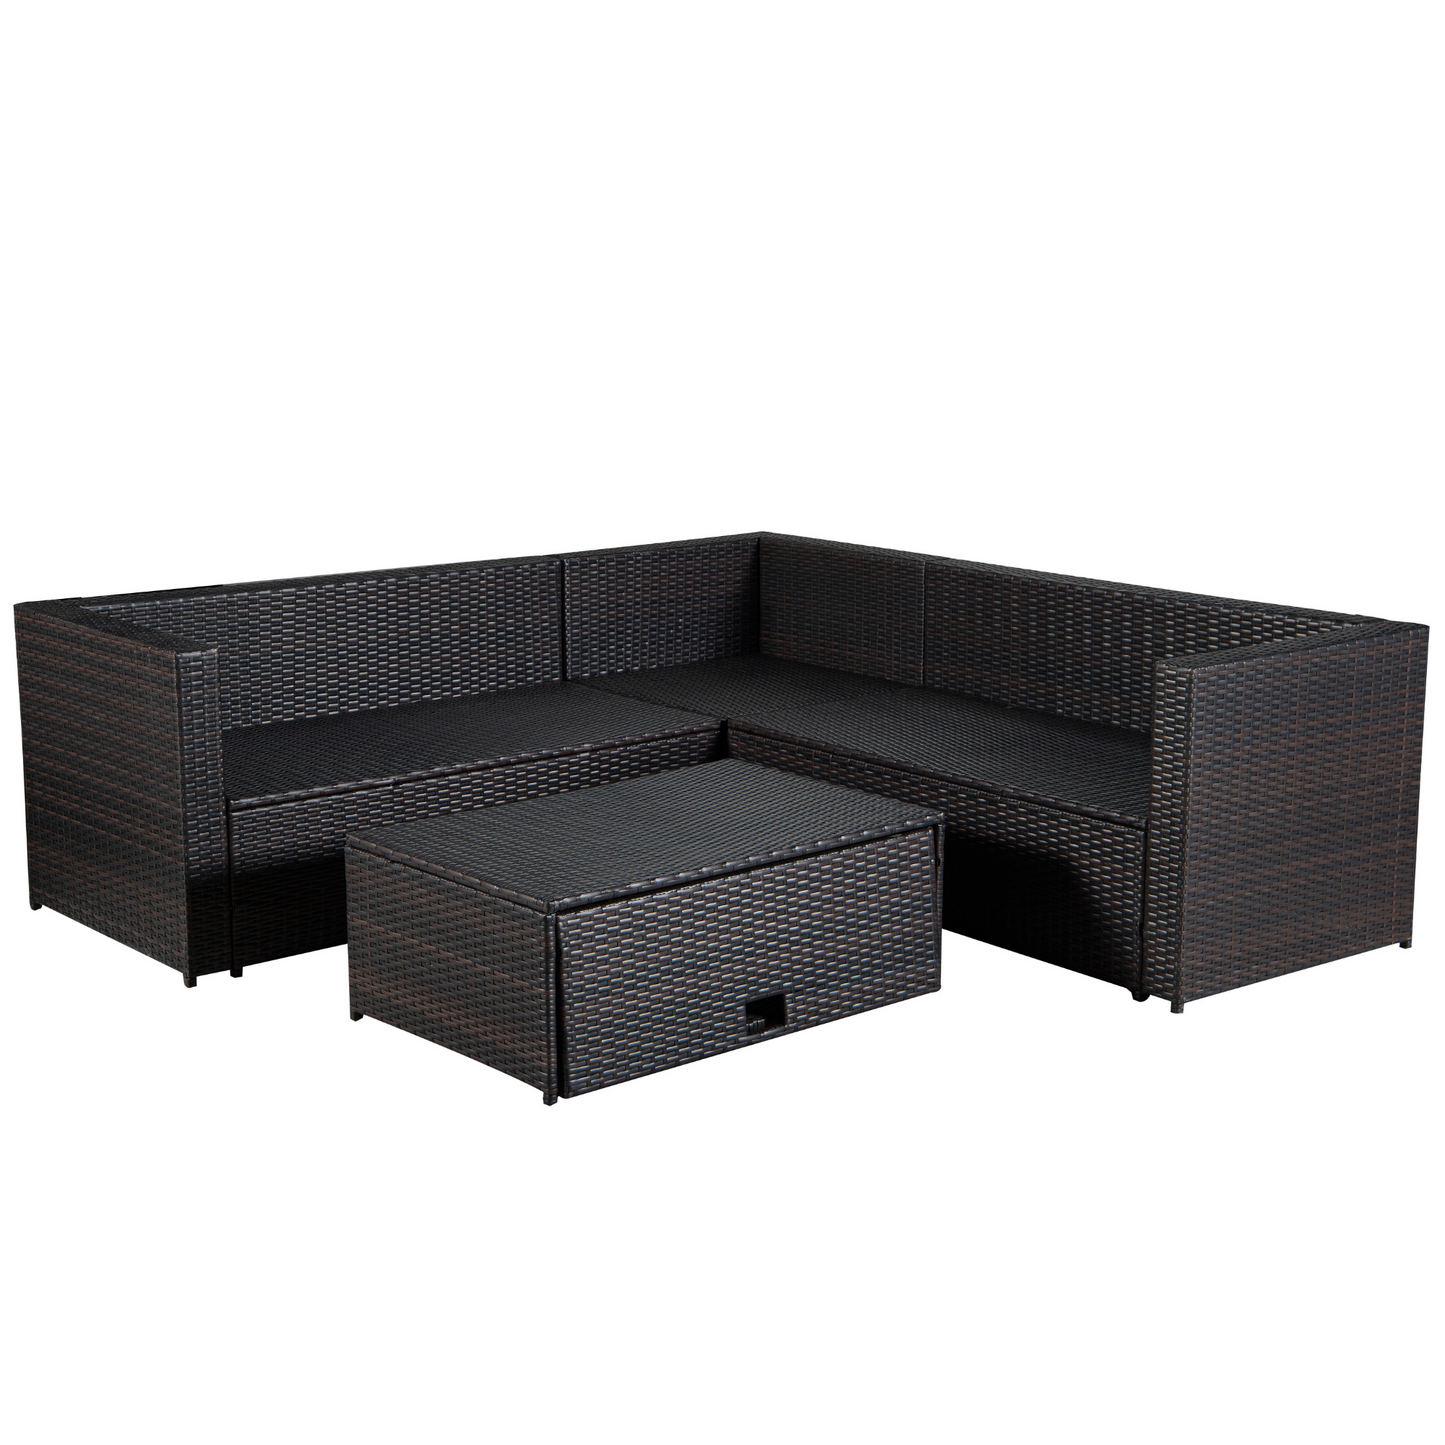 Patio Set 4-Piece Brown Poly Rattan Blue Cushion Combined 2 Blue Pillows Sectional Option Sofa Sets And Multifunctional Table